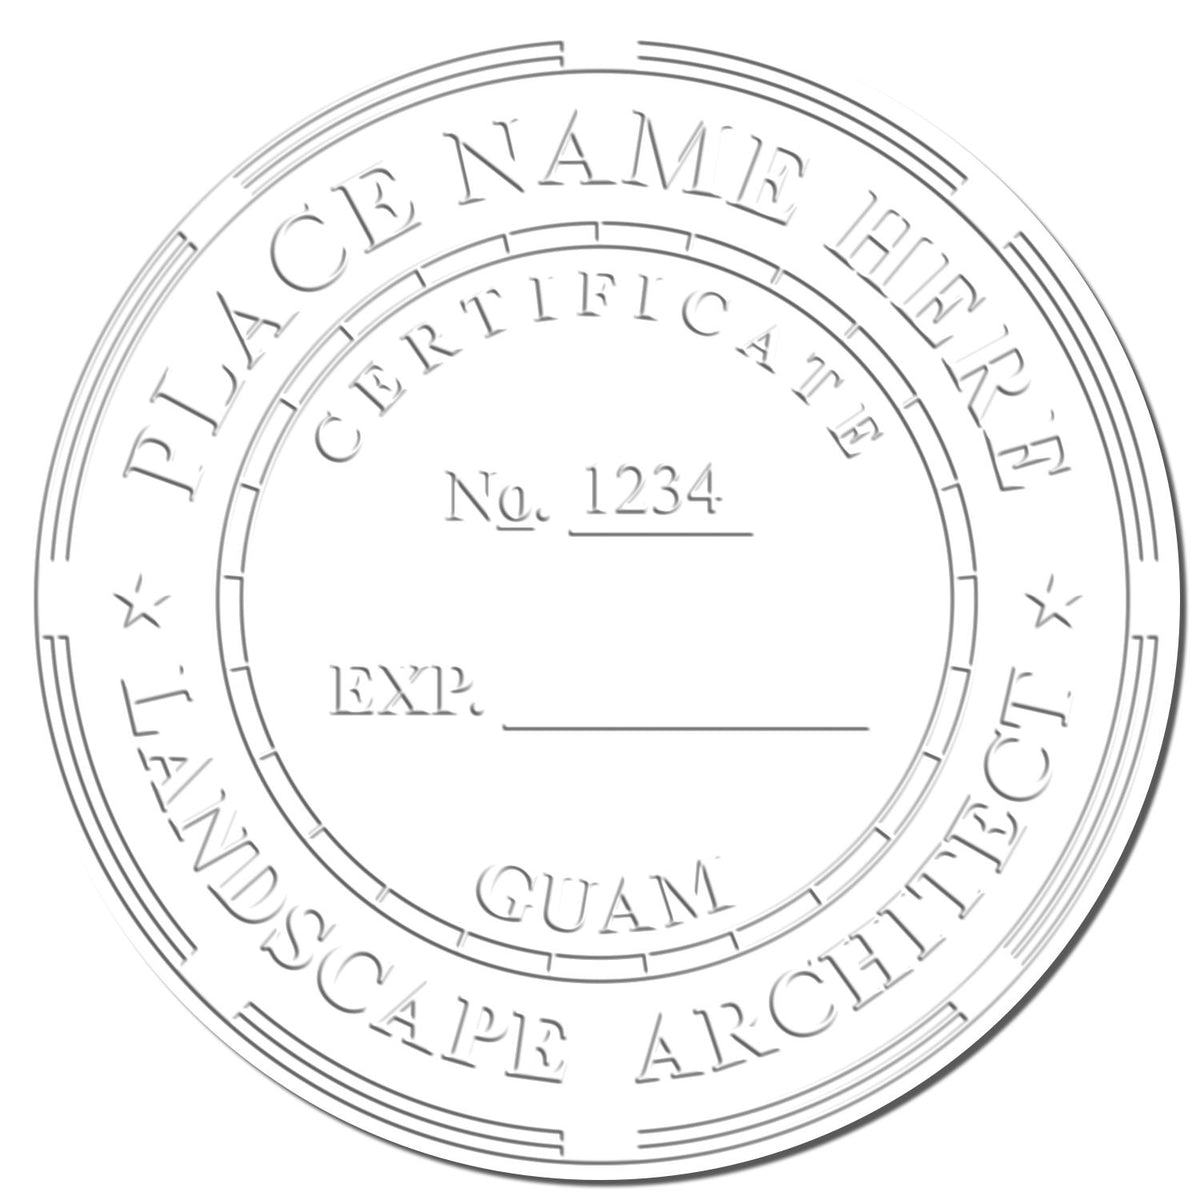 This paper is stamped with a sample imprint of the Hybrid Guam Landscape Architect Seal, signifying its quality and reliability.